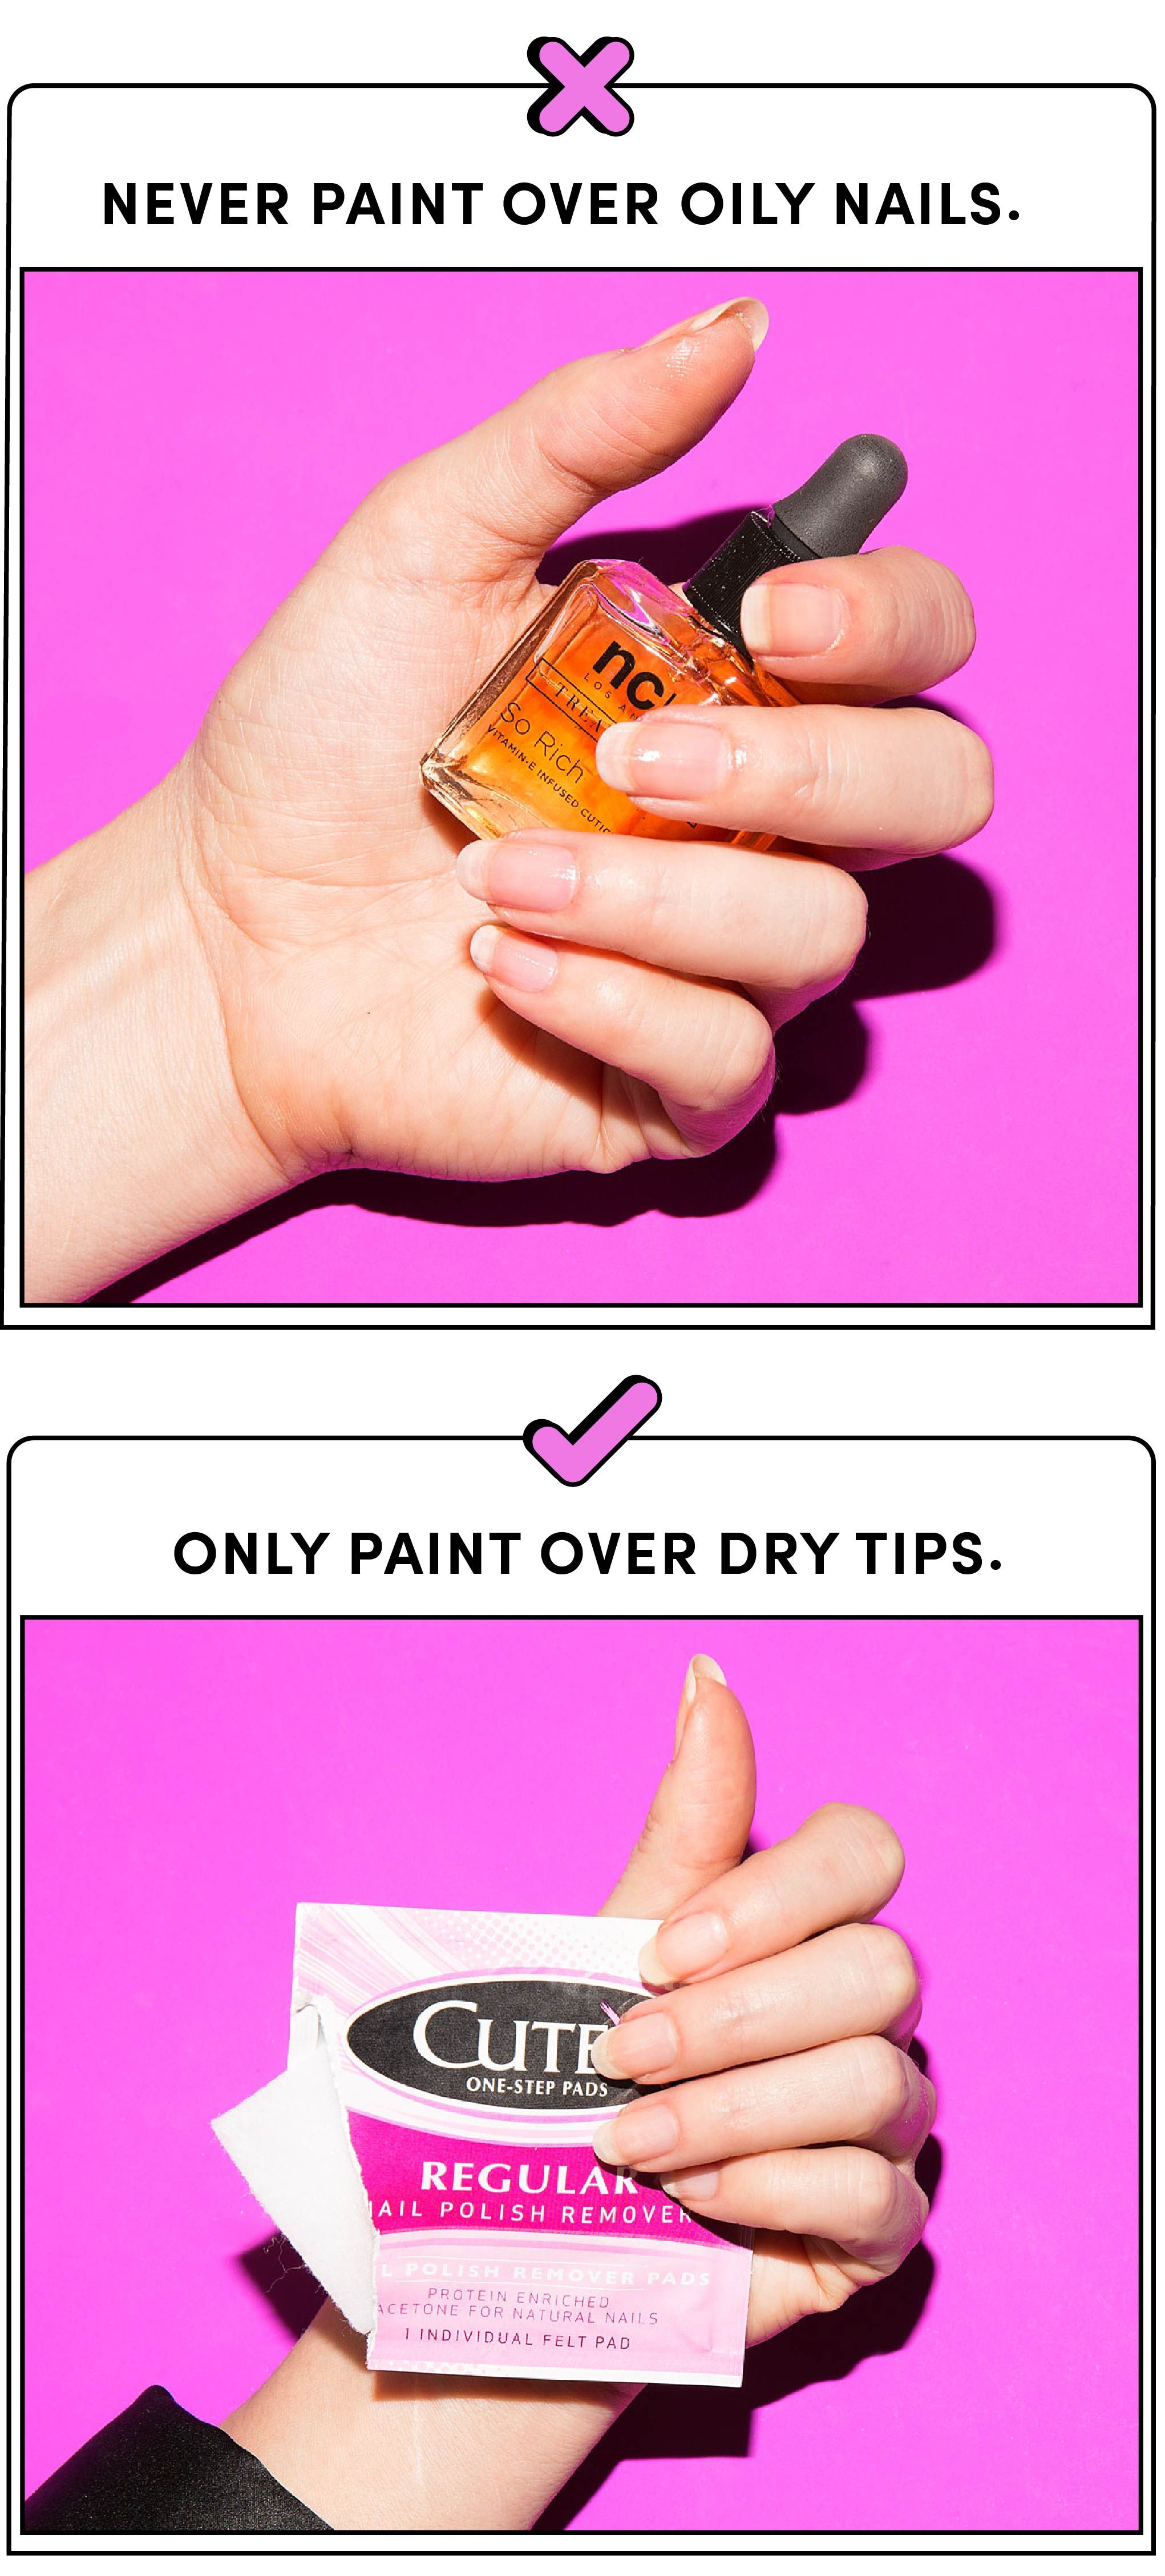 How to Have Healthy Nails | Wellness Mama